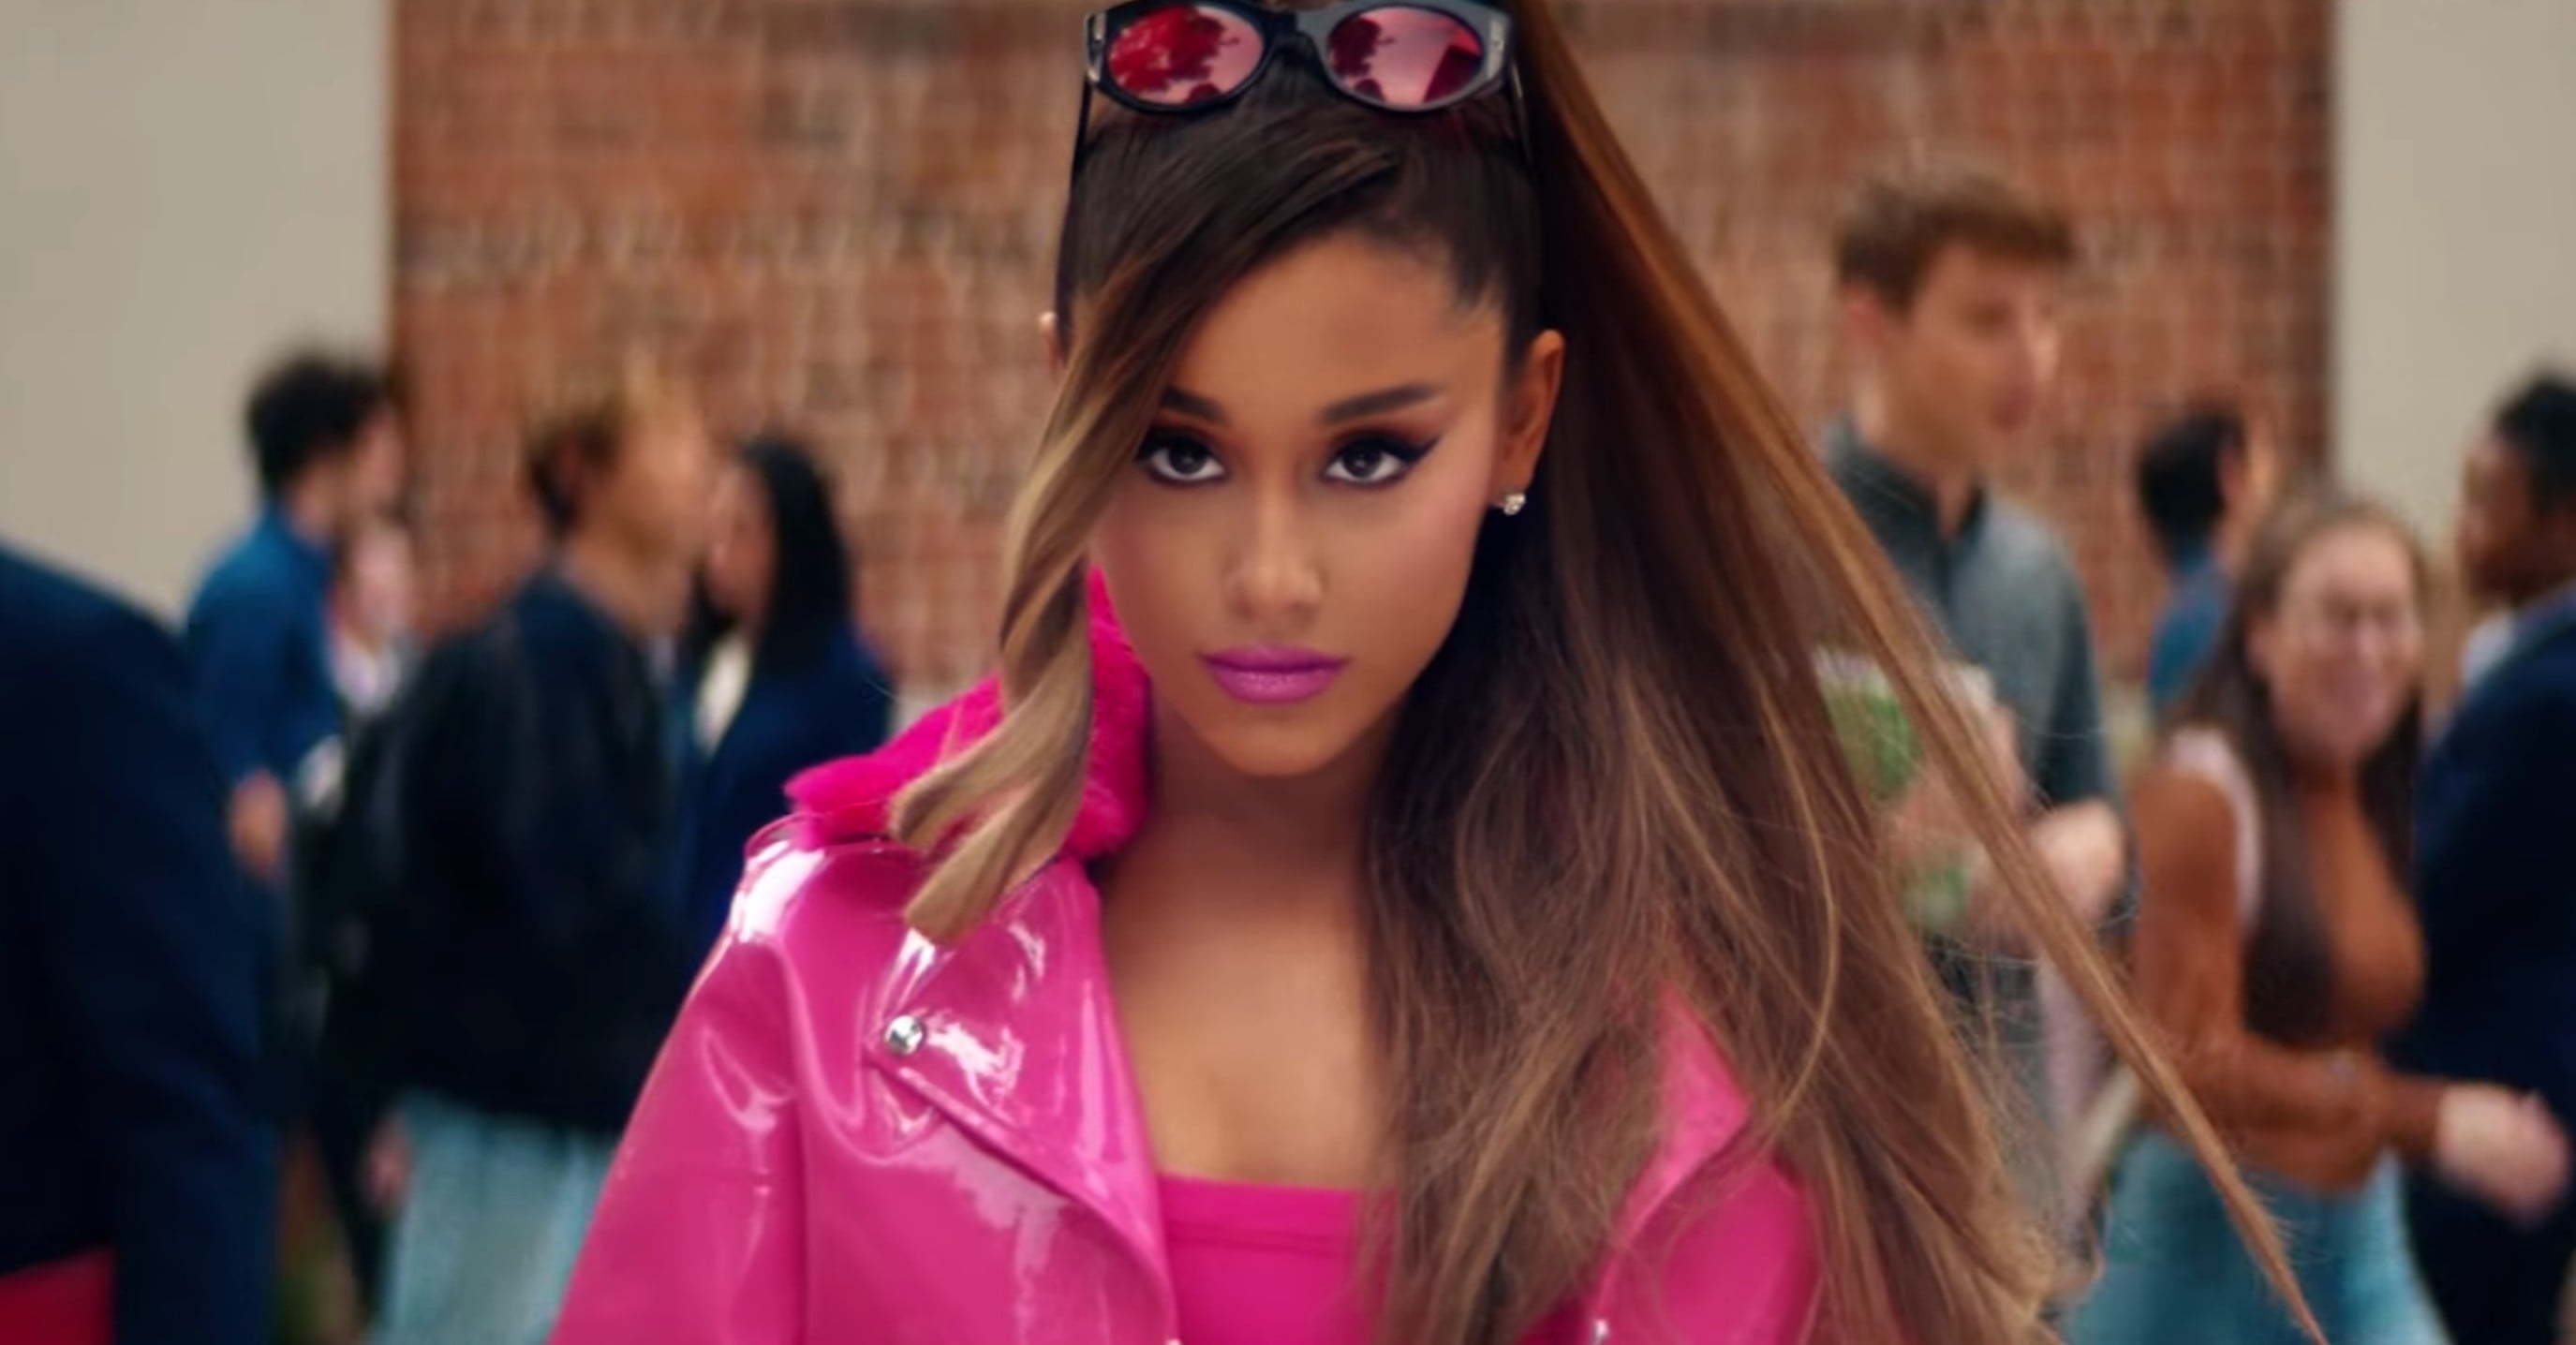 Ariana Grande As Regina George Is The Most Fetch Thing You'll See This Week